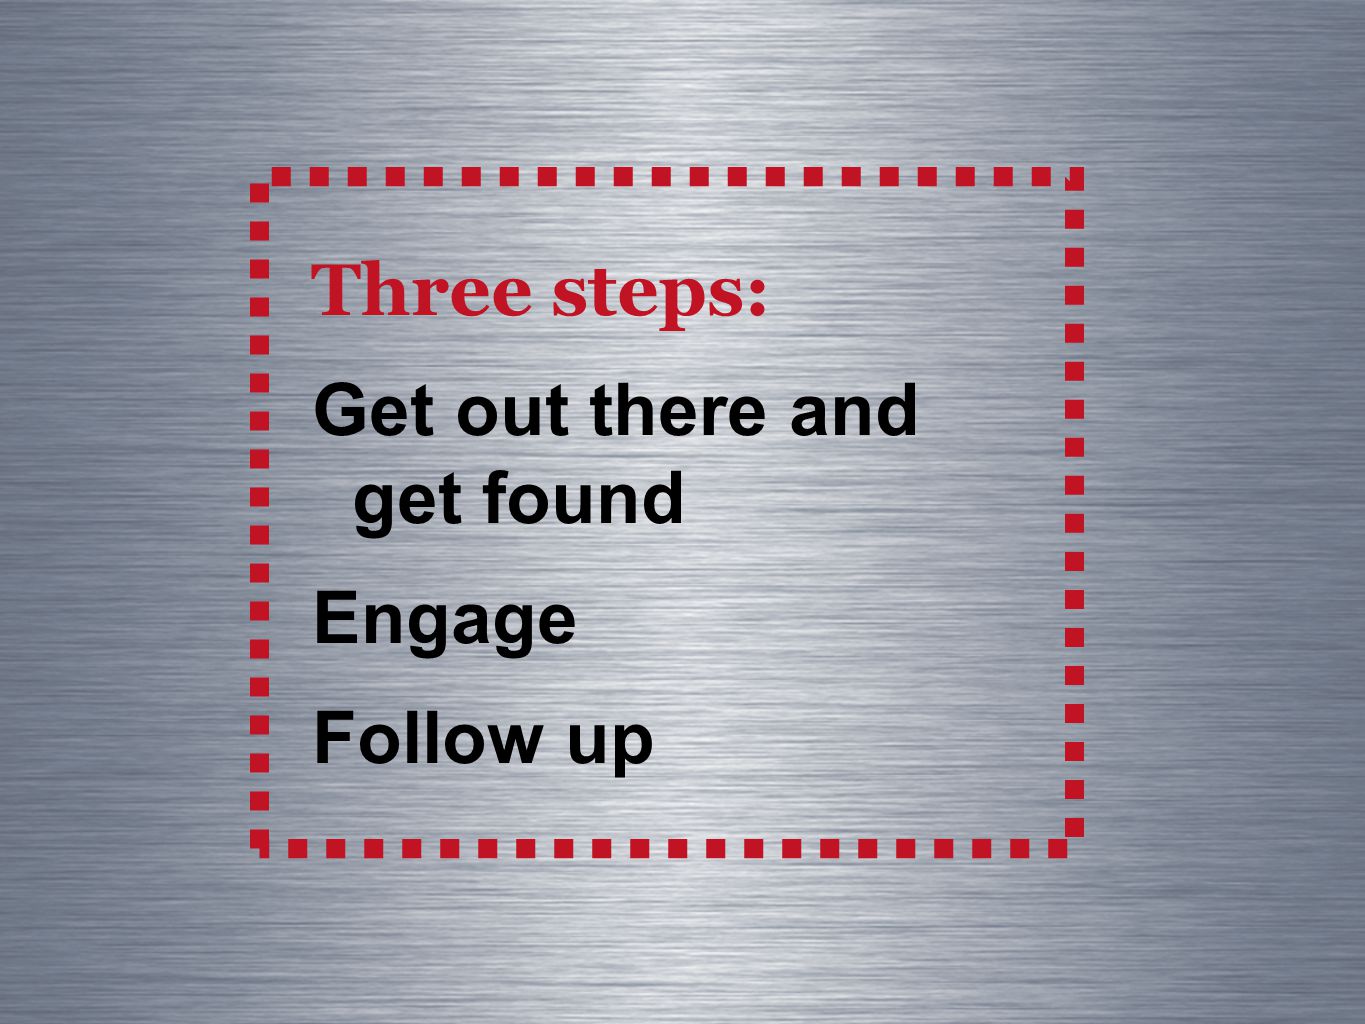 Three steps: Get out there and get found Engage Follow up